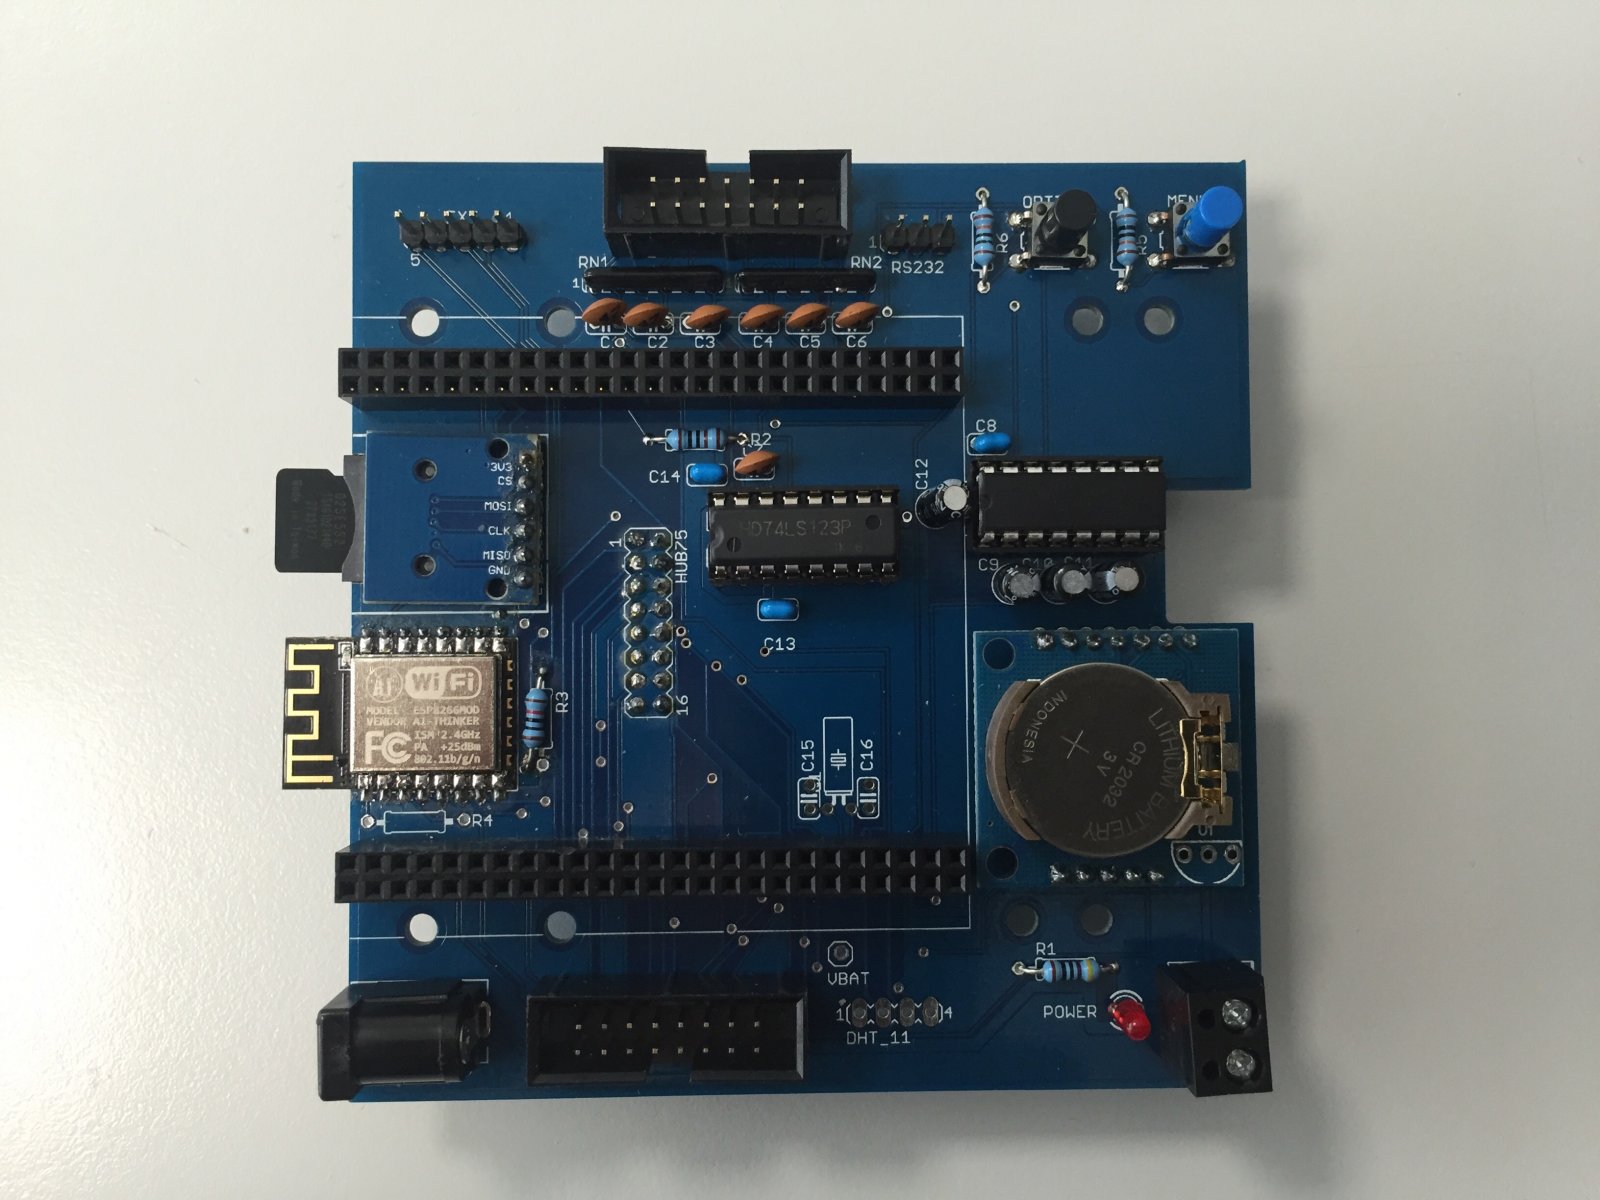 Top view of the pin2dmd / go-dmd V3 shield